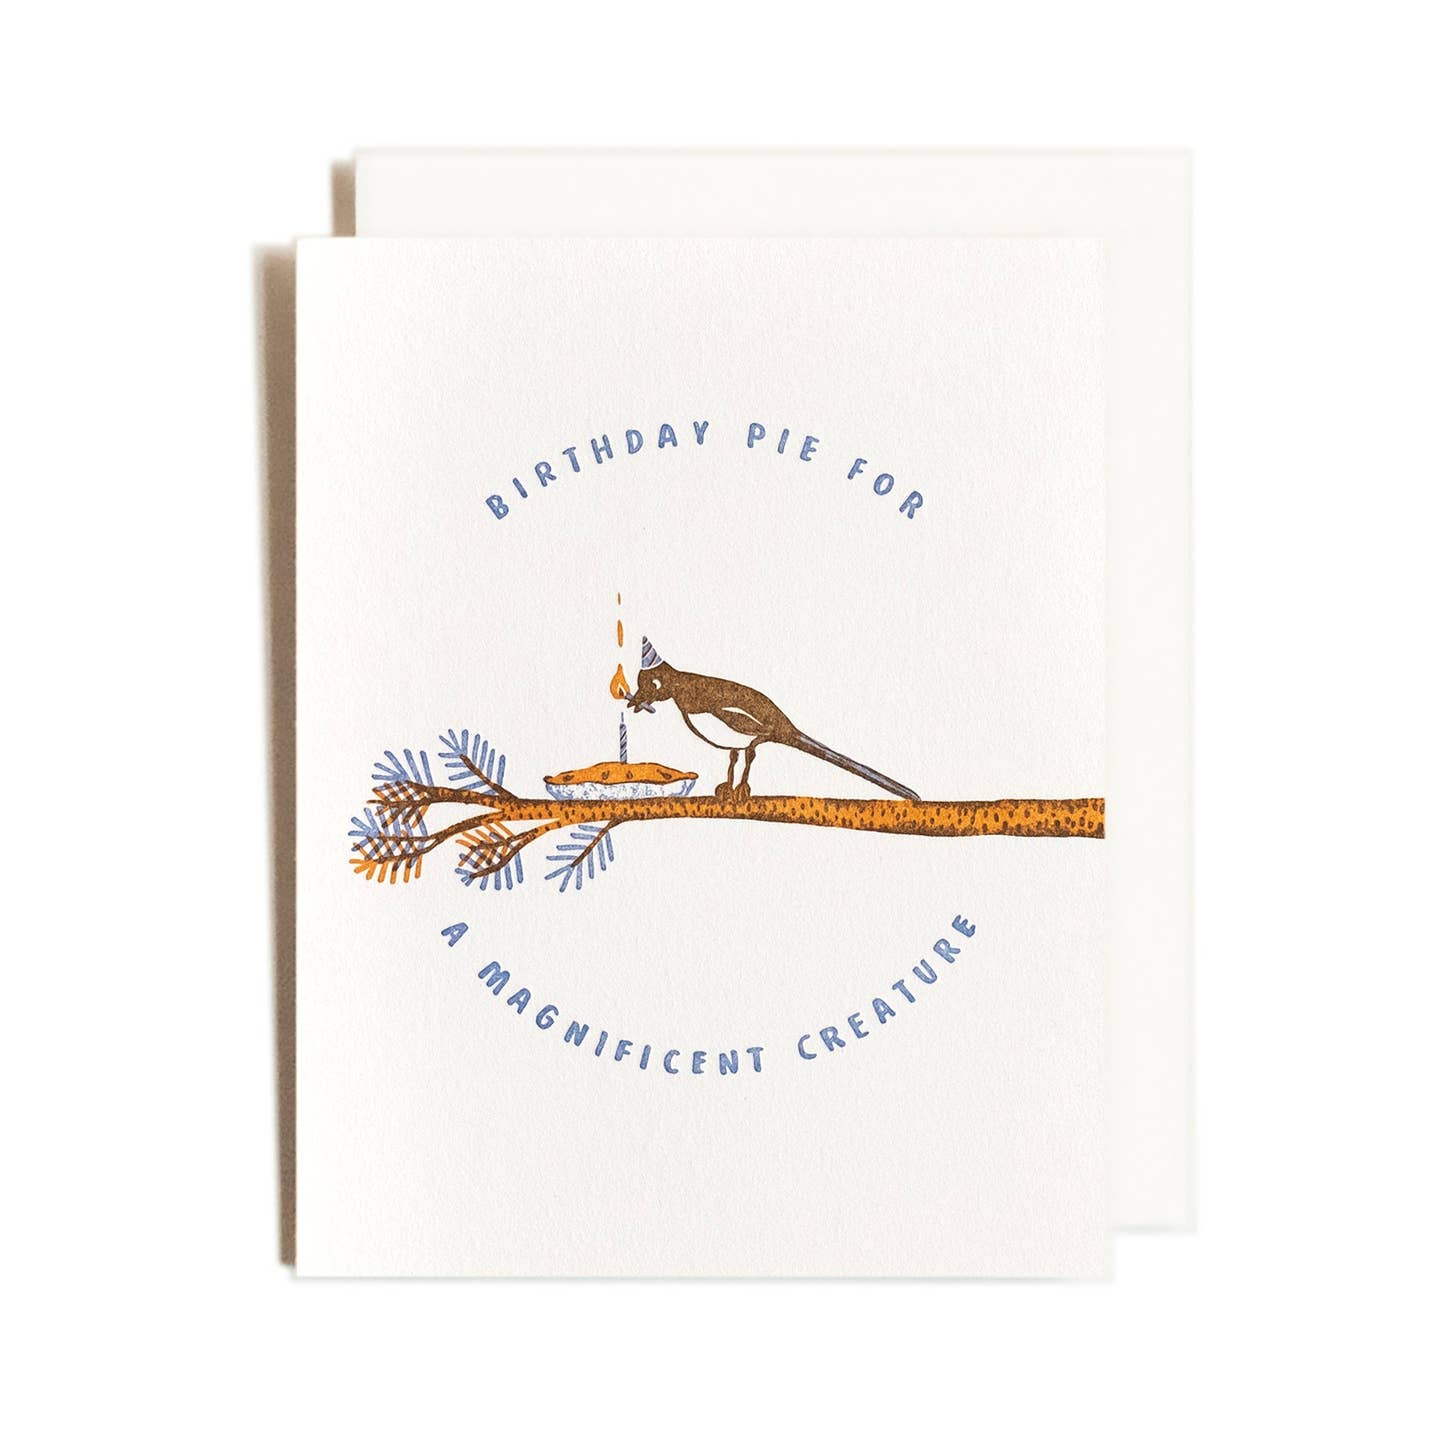 Greeting card with cream background and image of brown magpie holding a lighted match and lighting a candle on a pie sitting on a tree branch. Blue text says, "Birthday pie for a magnificent creature.  Cream envelope included. 